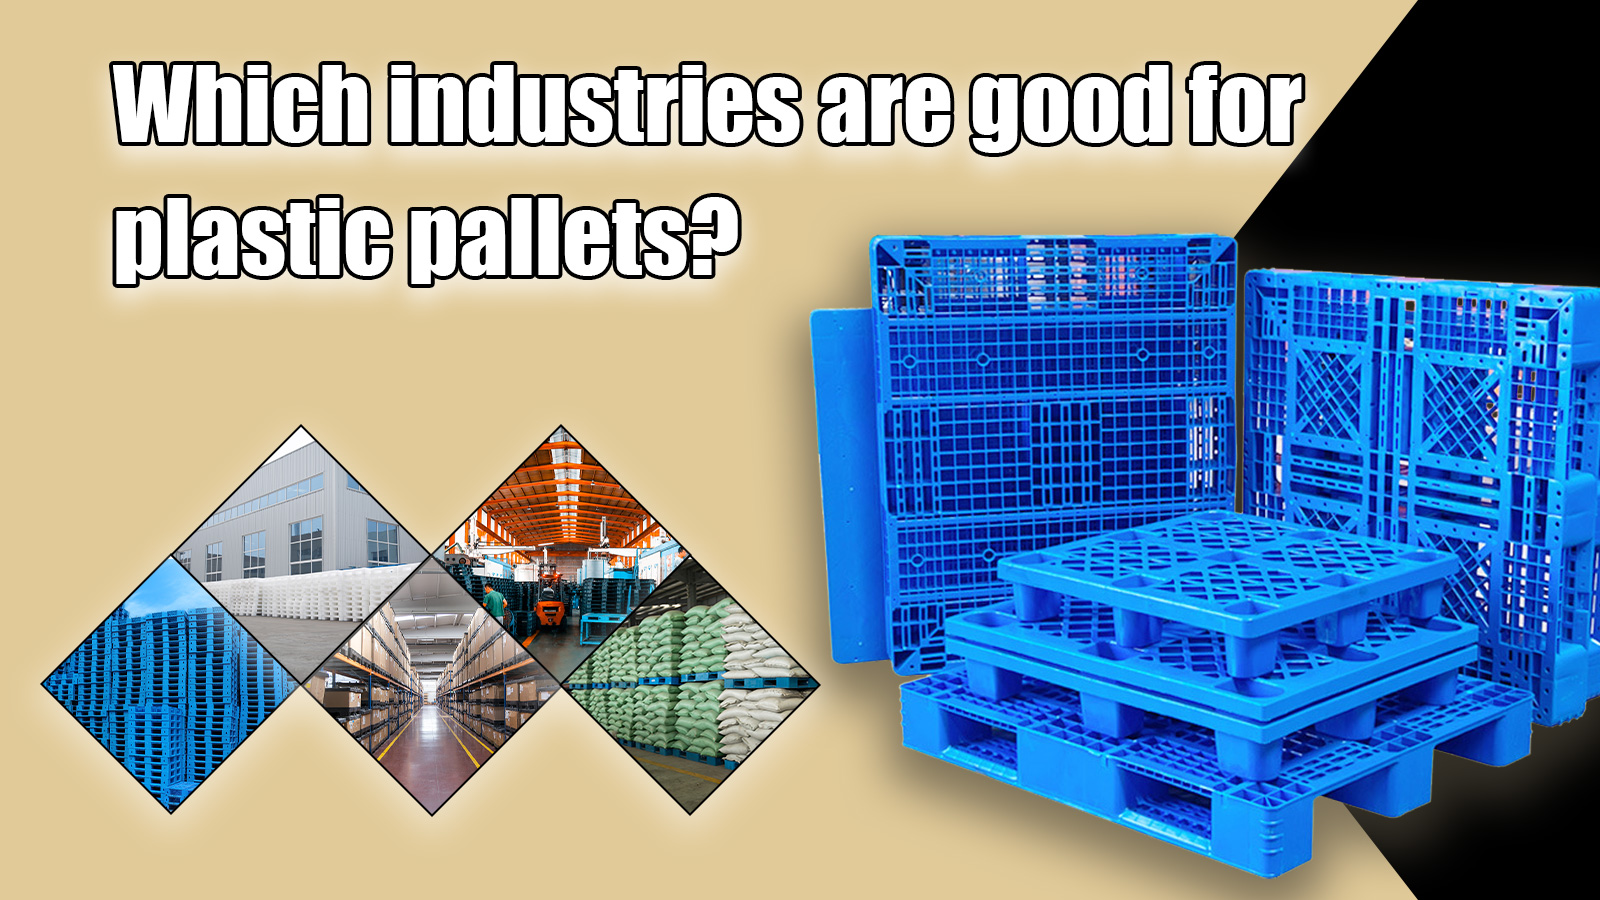 Which industries are good for plastic pallets?